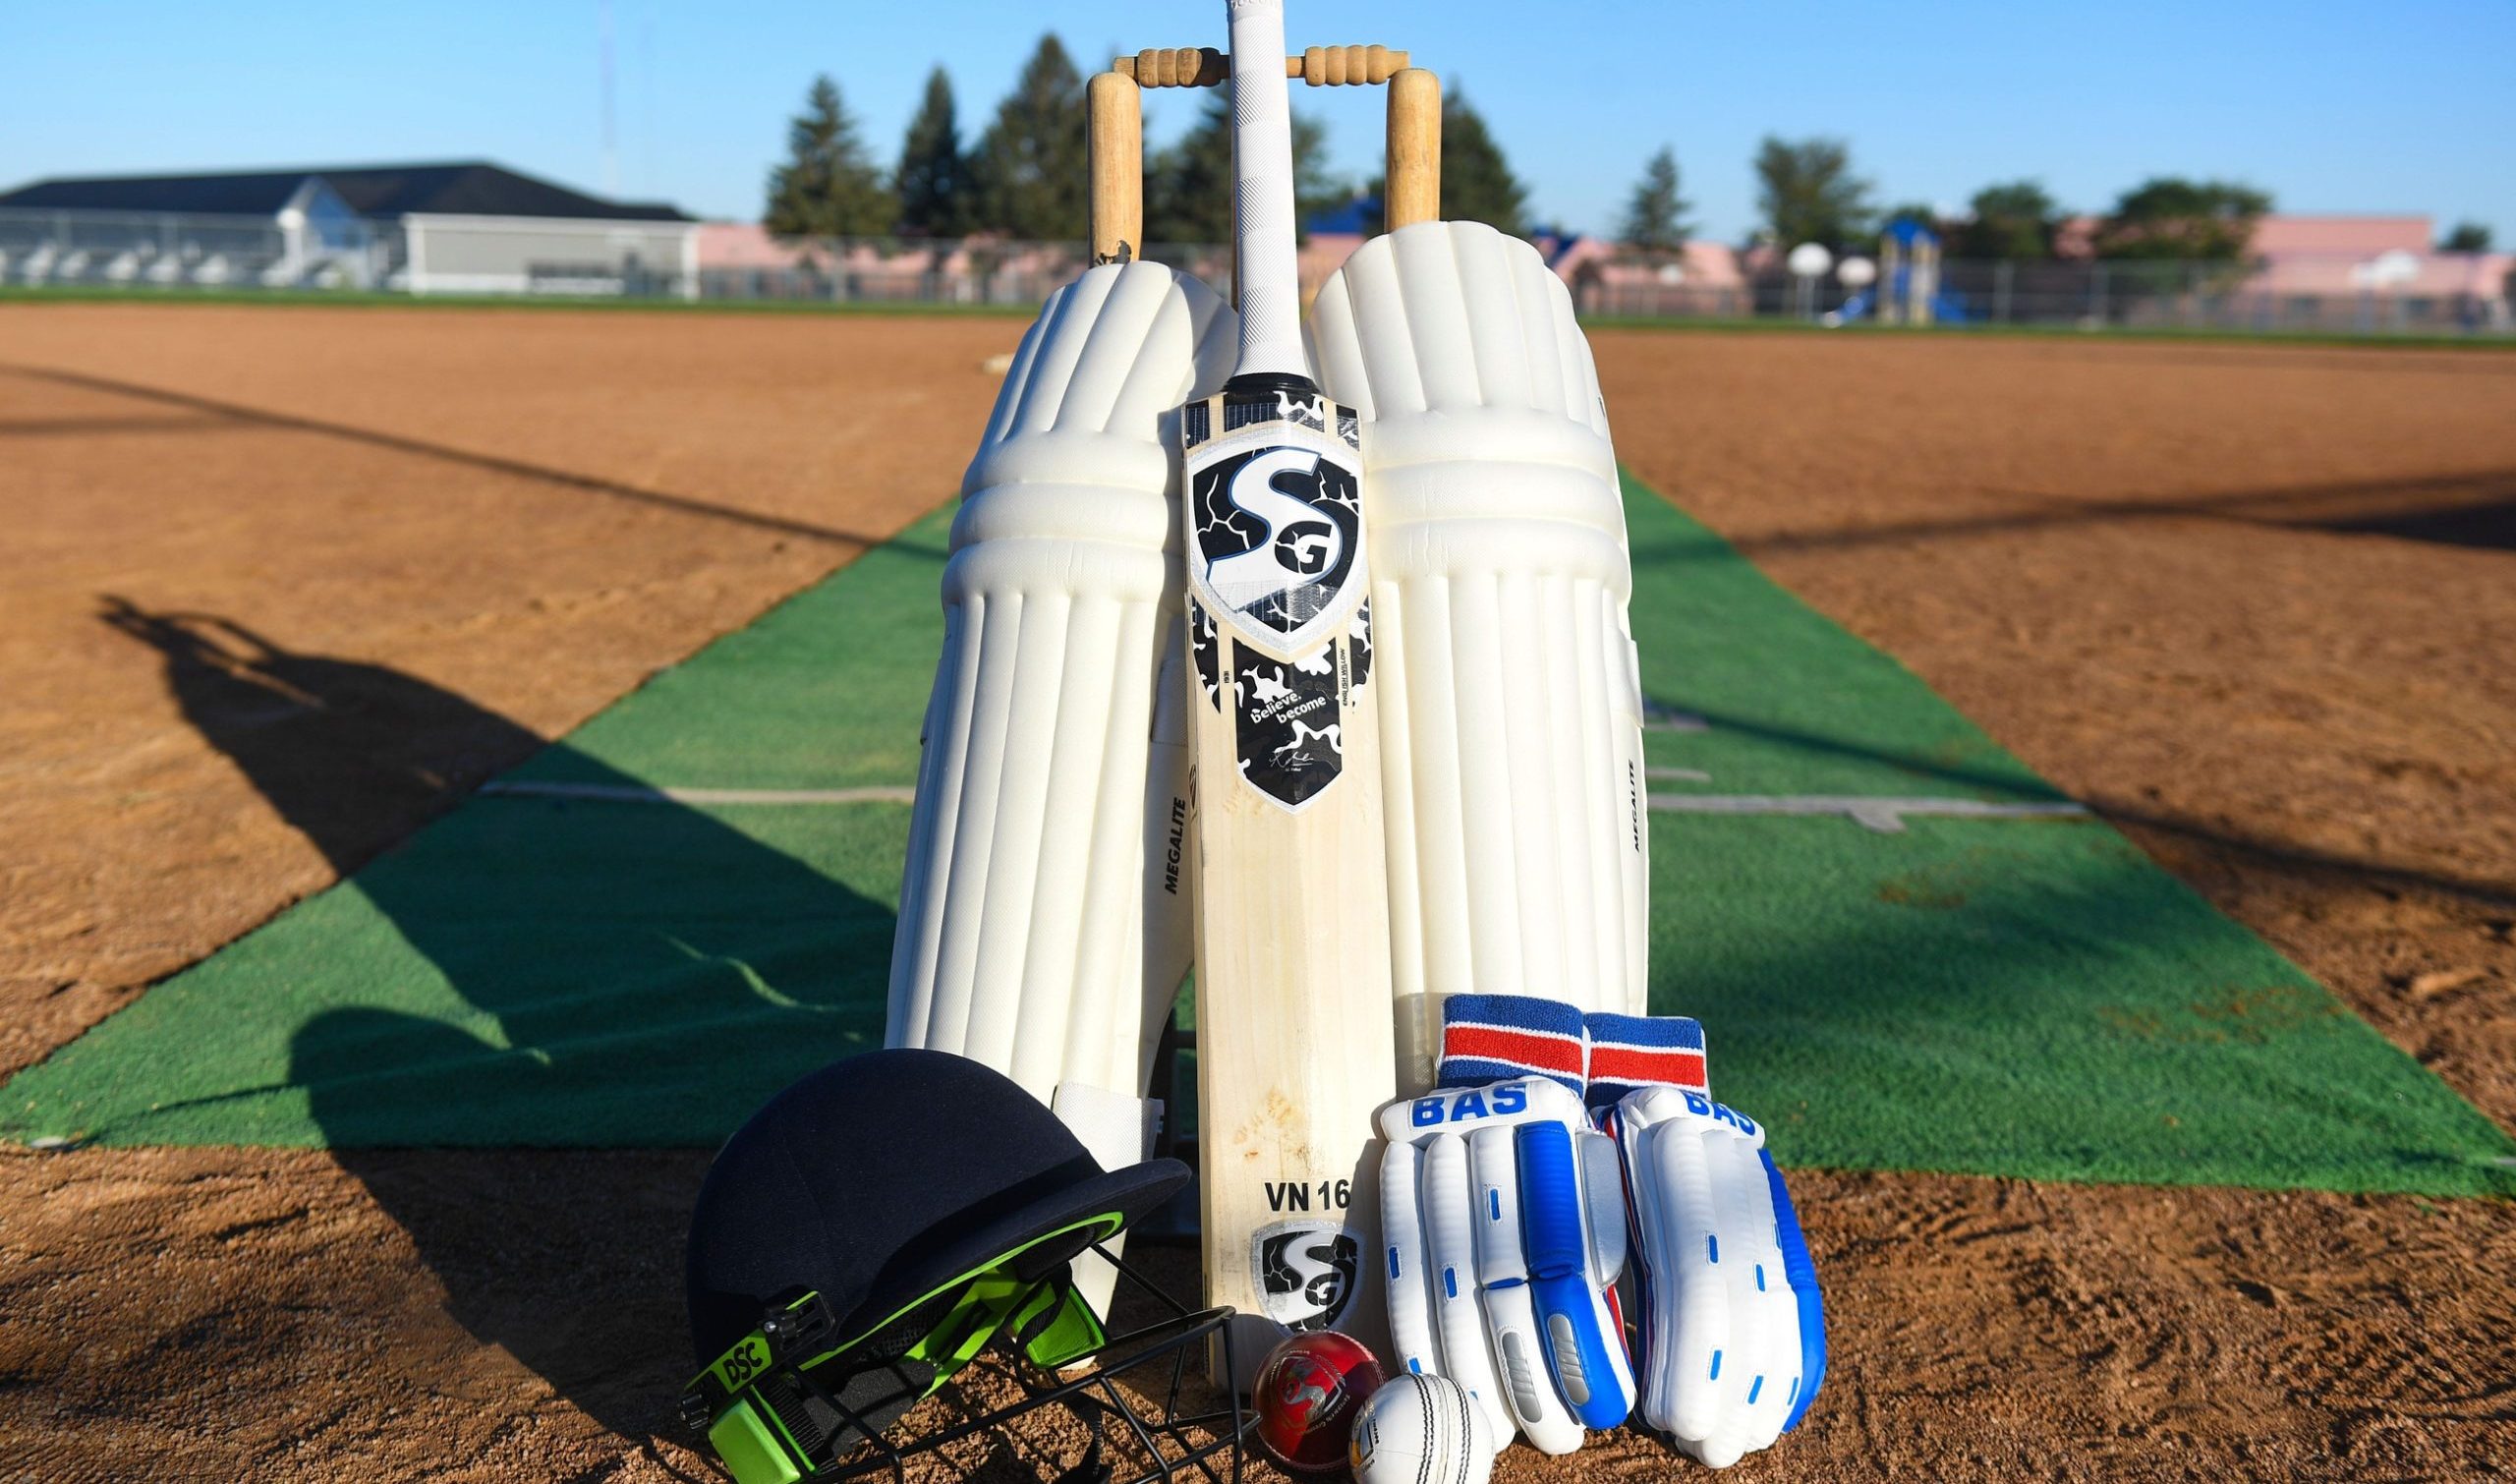 Example of professional cricket equipment, including leg pads, a bat, a helmet, gloves and balls, are set up on Sunday, September 11, 2022, at Kenny Anderson Park in Sioux Falls.